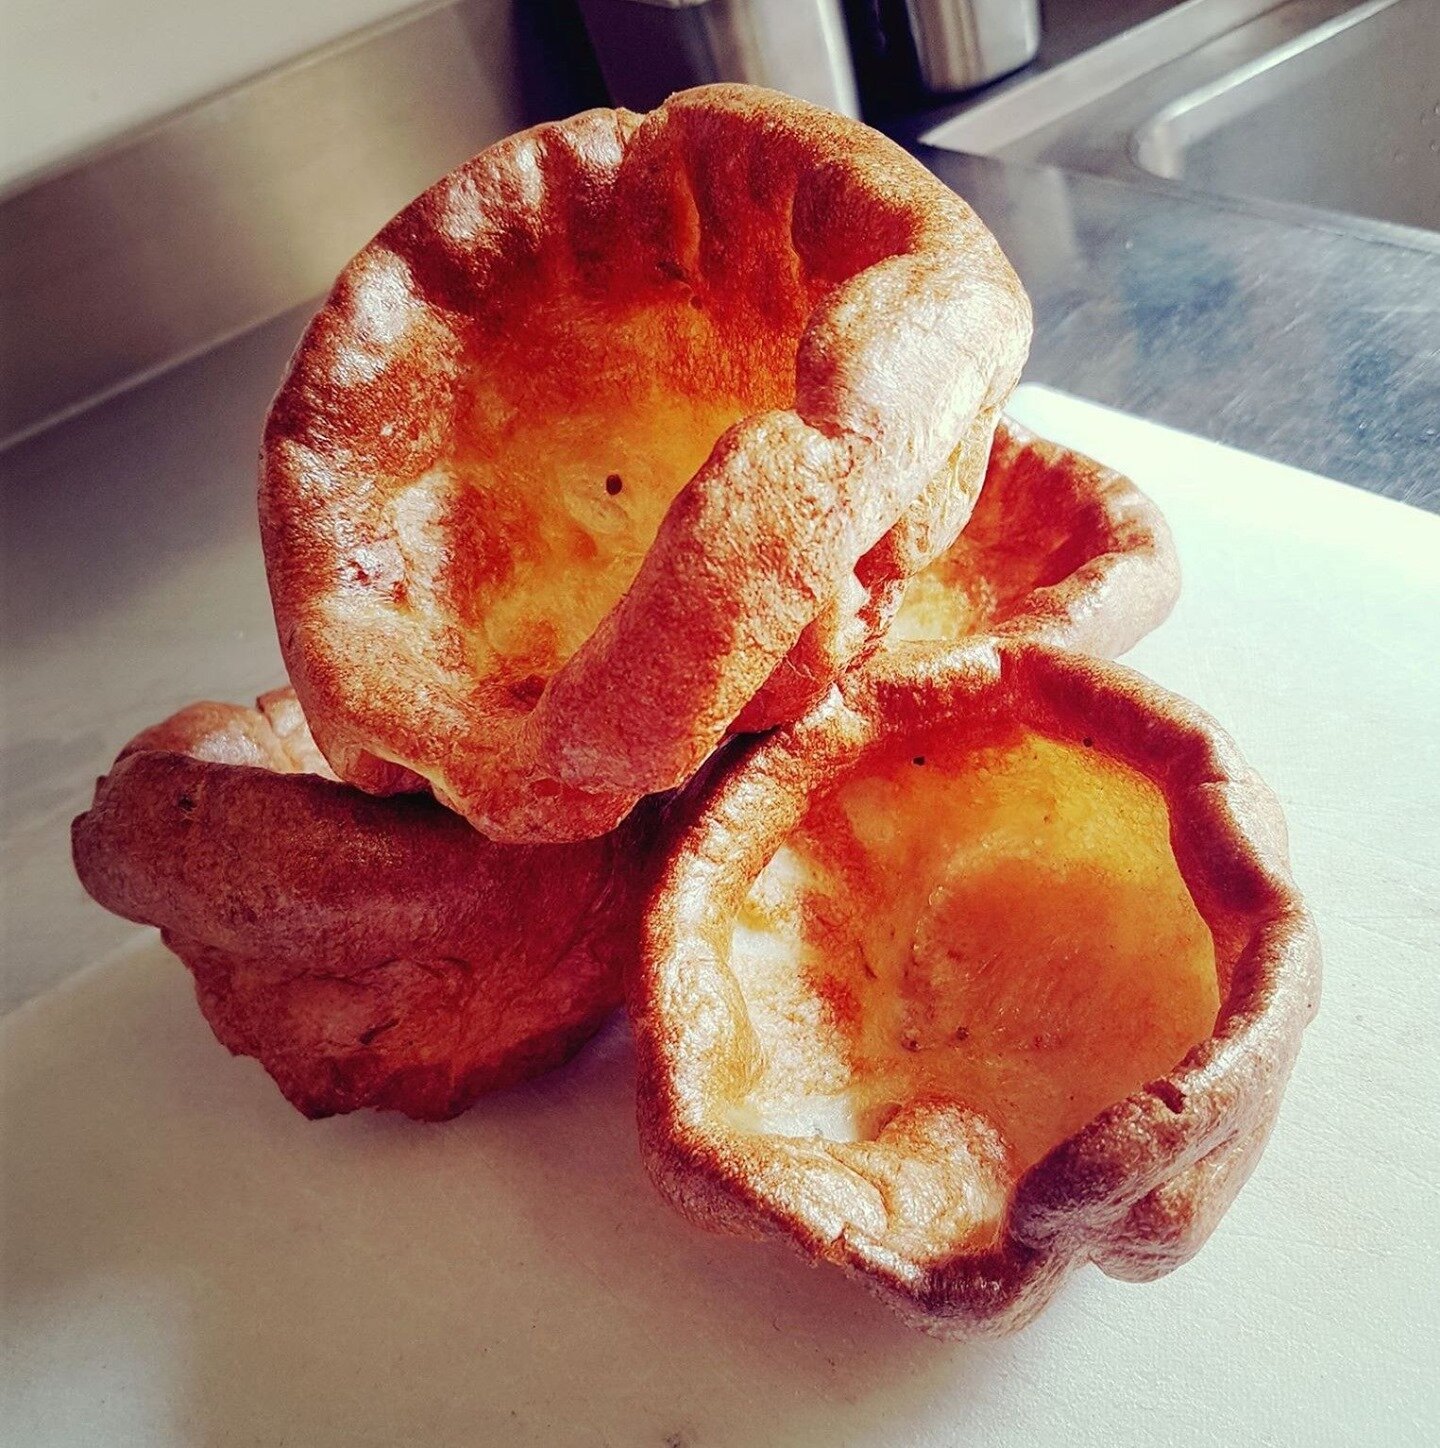 Who's ready for our bigger-than-your-head yorkshire puddings tomorrow?  Tag who you're bringing with you! #yorkies #giantyorkshirepuddings #yummy #sundayfunday